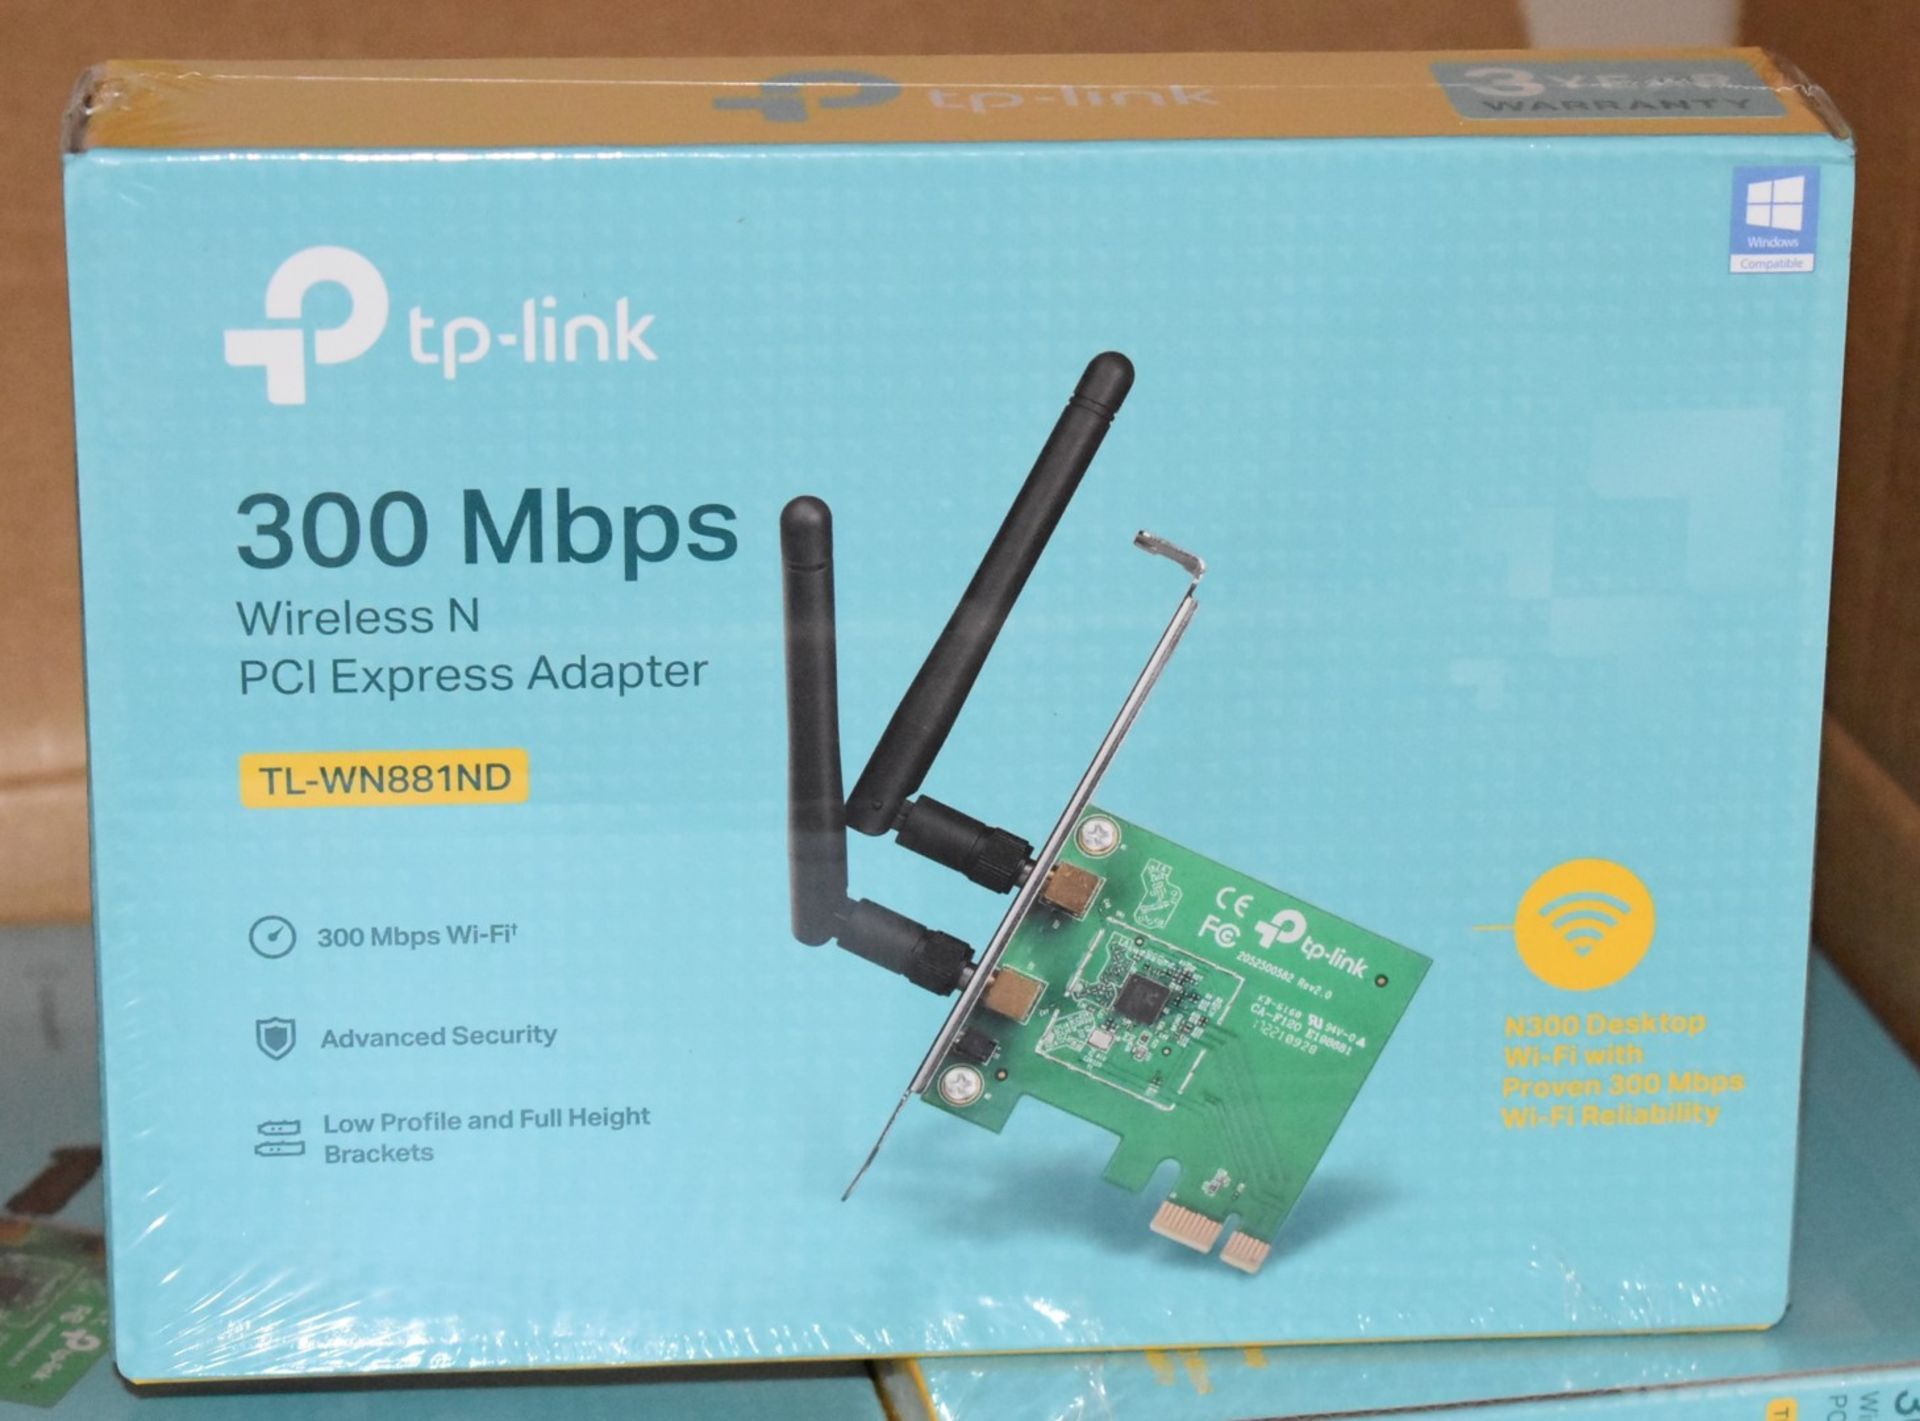 1 x TP Link 300Mbps Wireless N PCI Express Adapter - TL-WN881ND - New Sealed Stock - Image 2 of 2